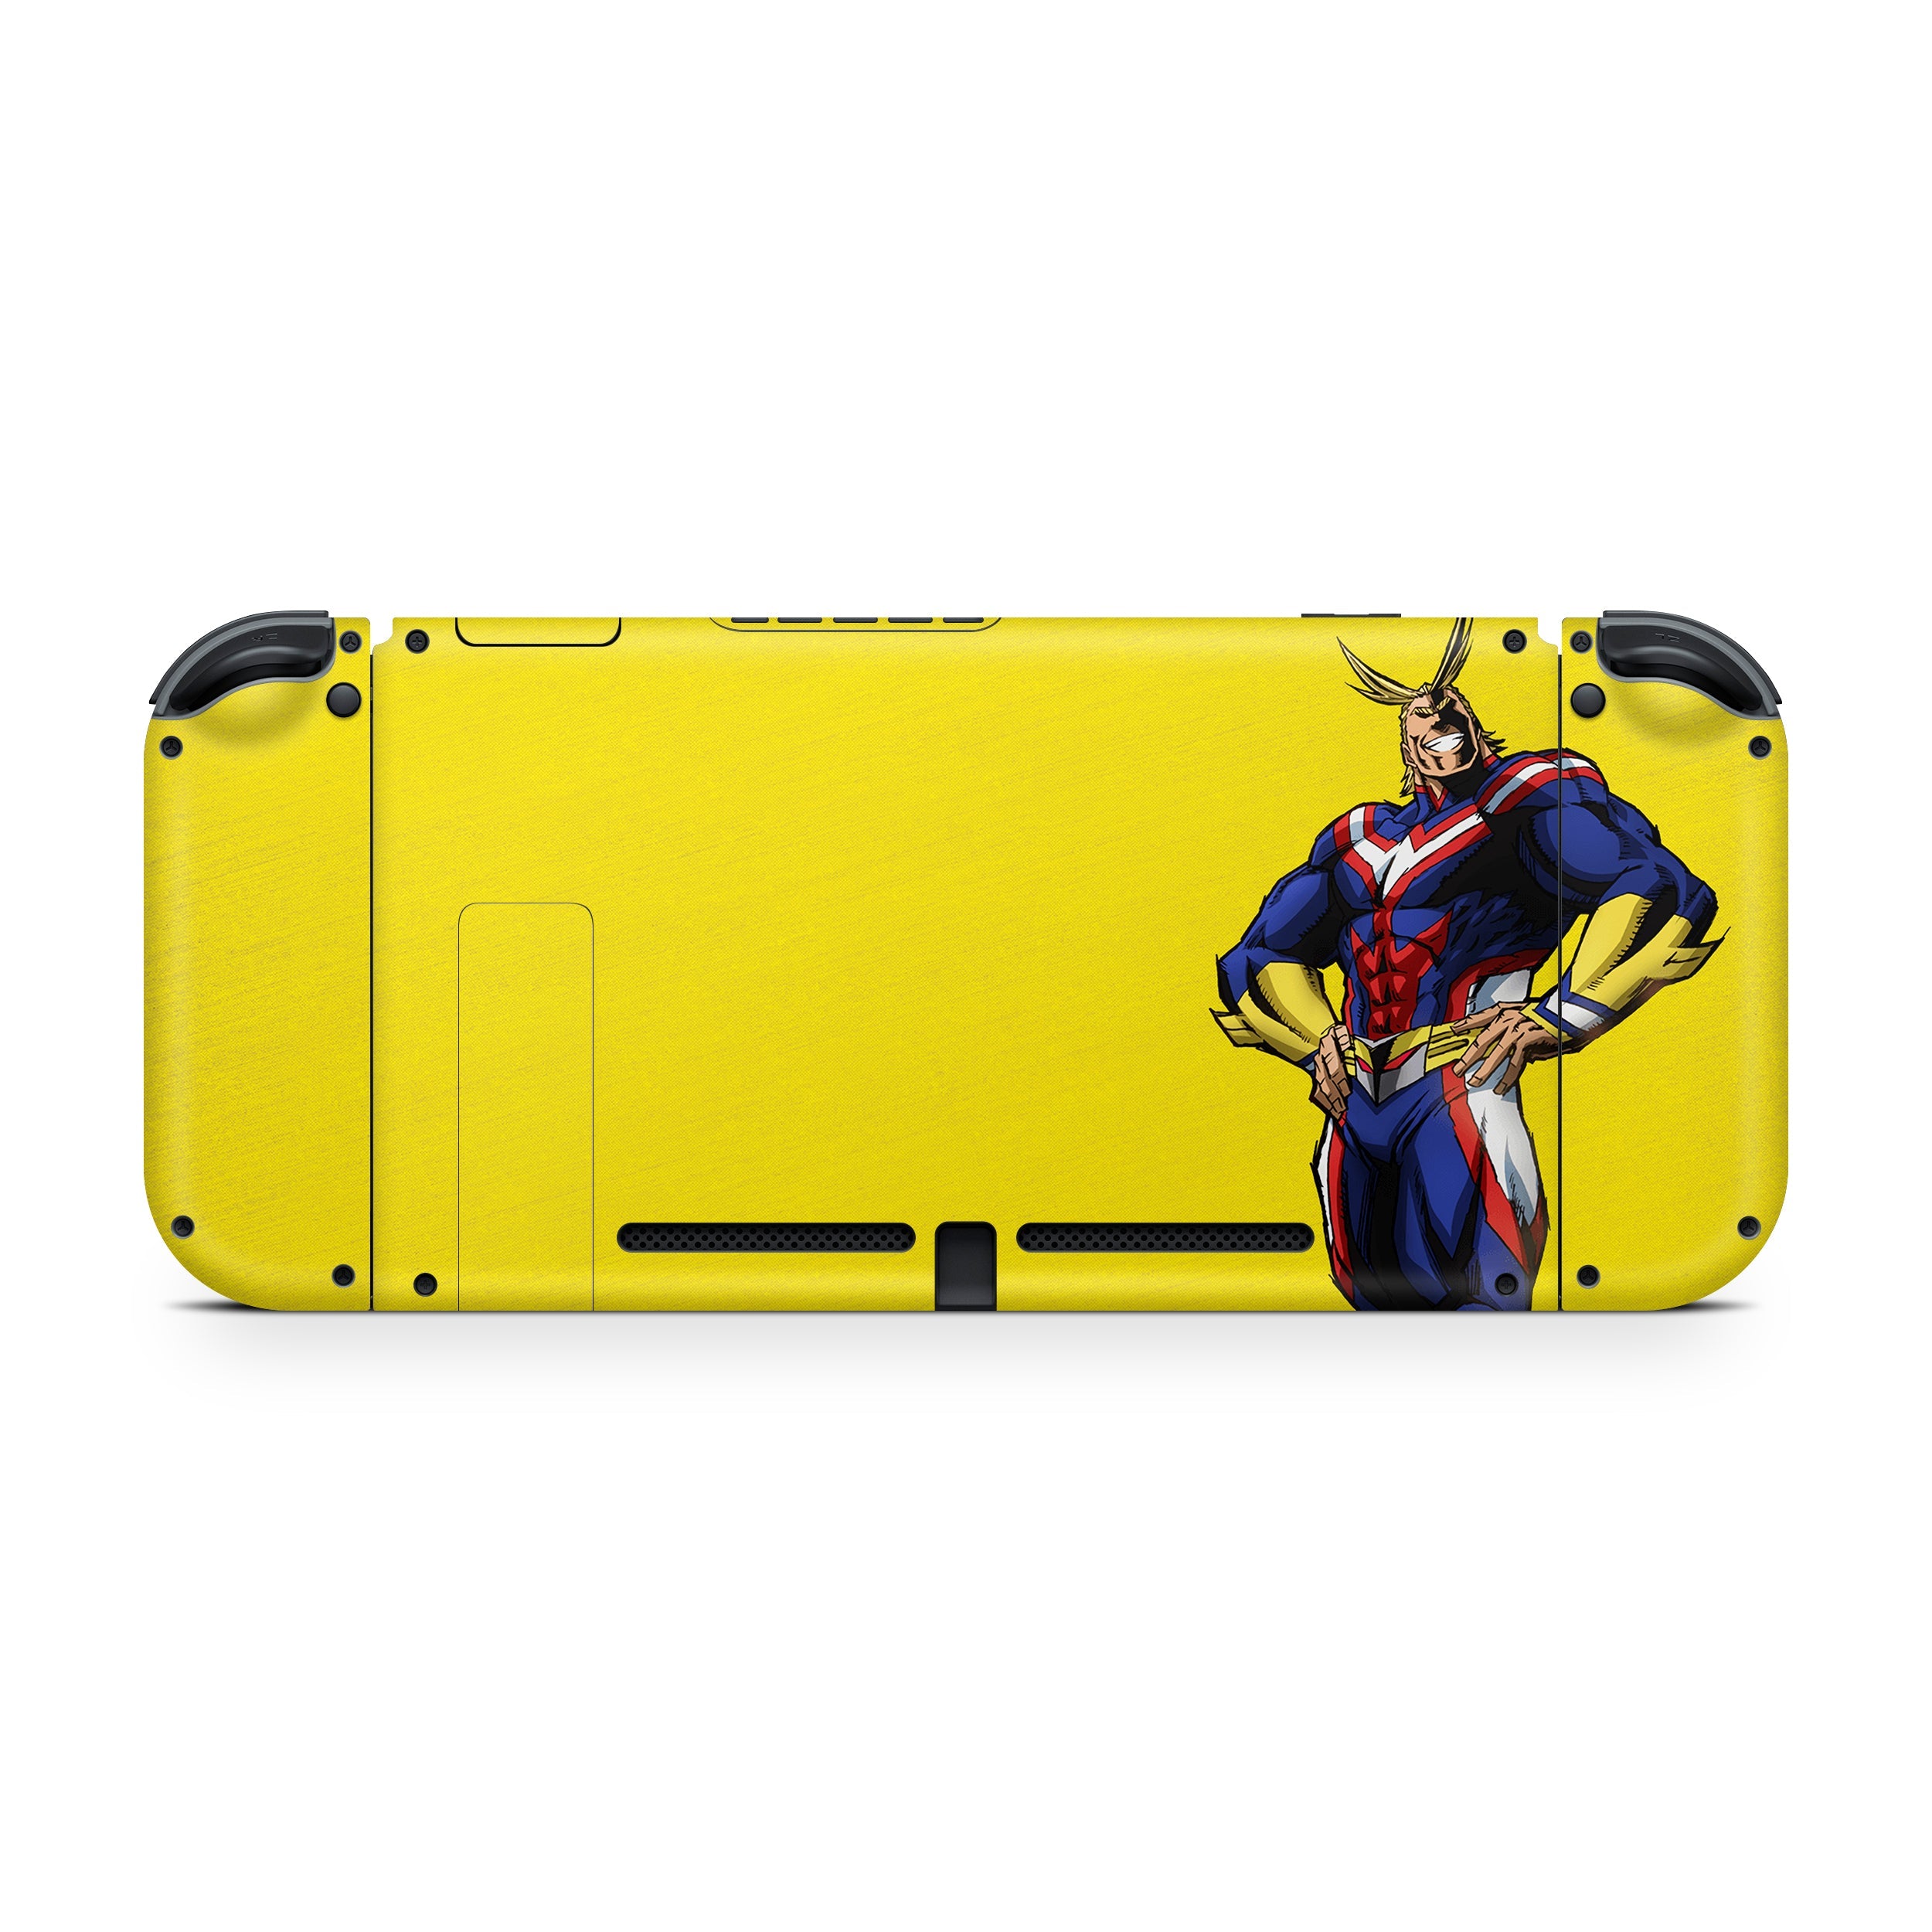 A video game skin featuring a My Hero Academia All Might design for the Nintendo Switch.